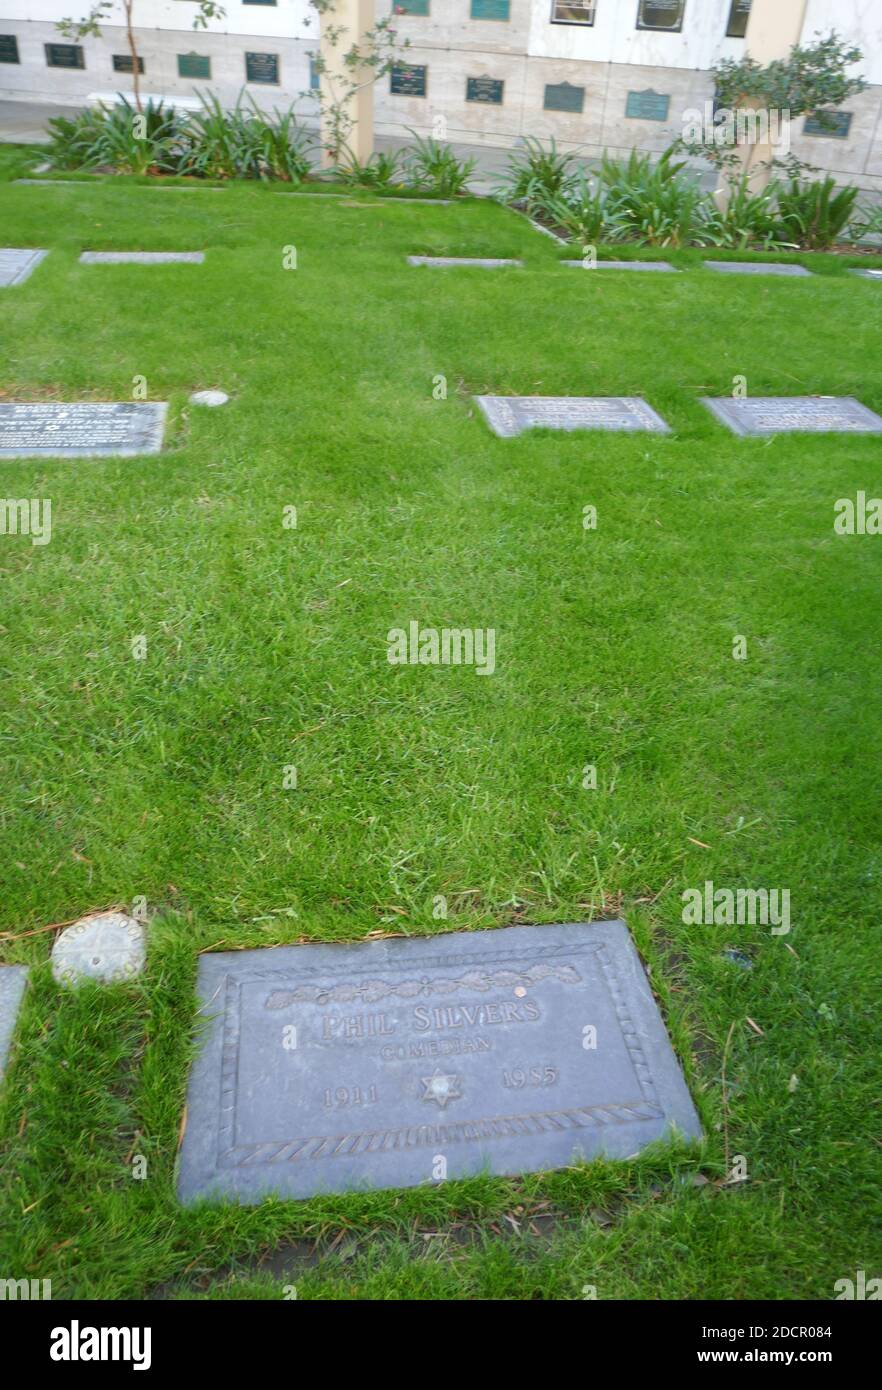 Los Angeles, California, USA 17th November 2020 A general view of atmosphere of comedian/actor Phil Silvers Grave at Mount Sinai Cemetery Hollywood Hills on November 17, 2020 in Los Angeles, California, USA. Photo by Barry King/Alamy Stock Photo Stock Photo